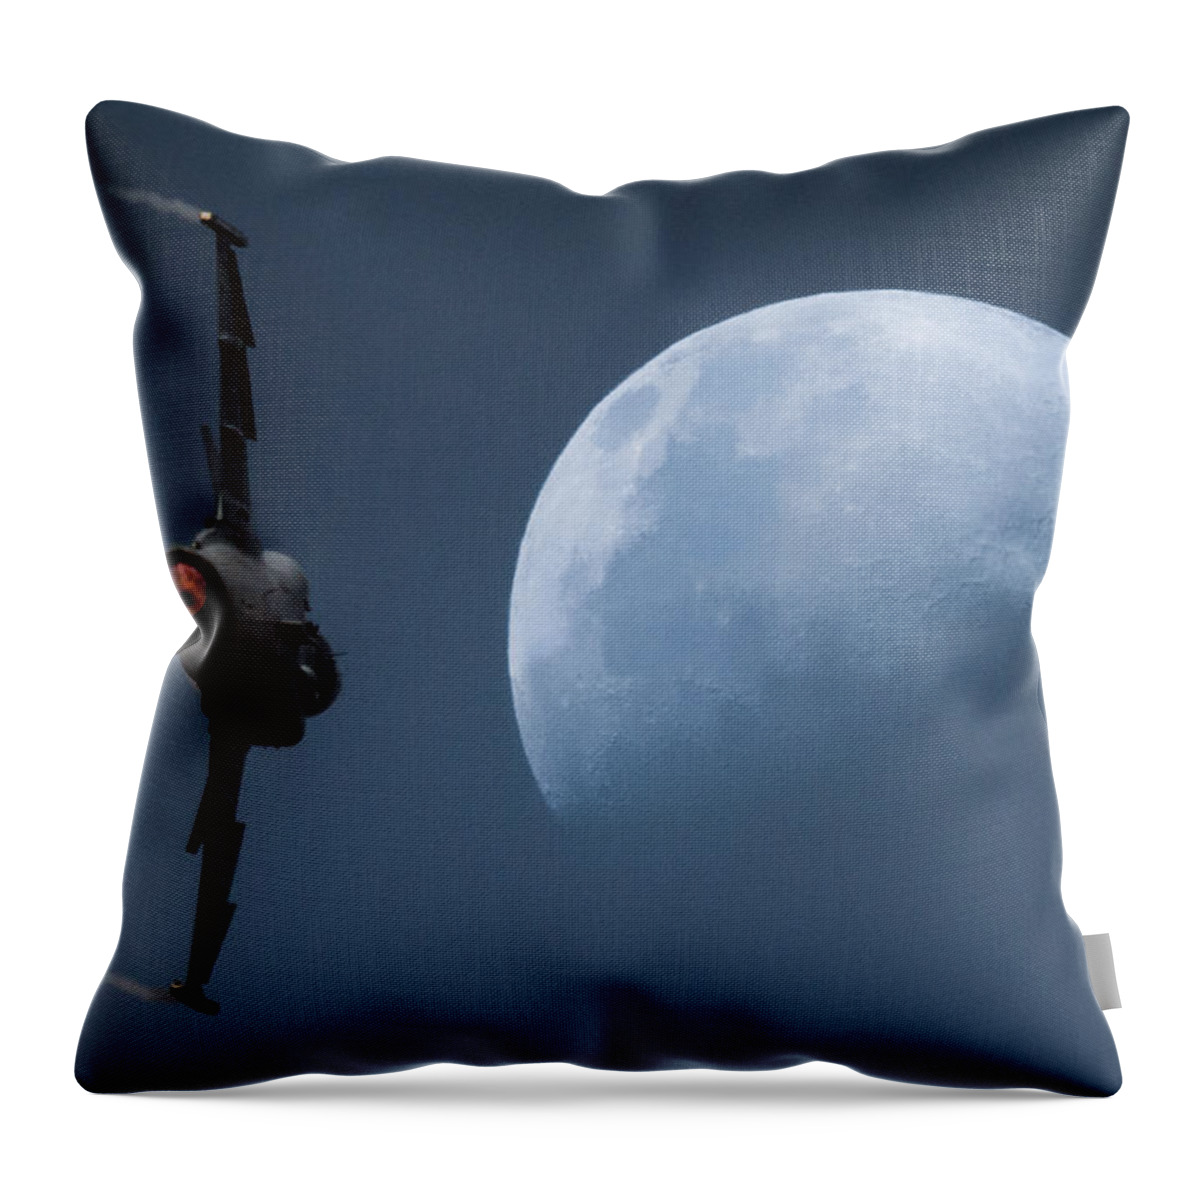 Jetfighter Throw Pillow featuring the photograph Gripen Moon by Paul Job